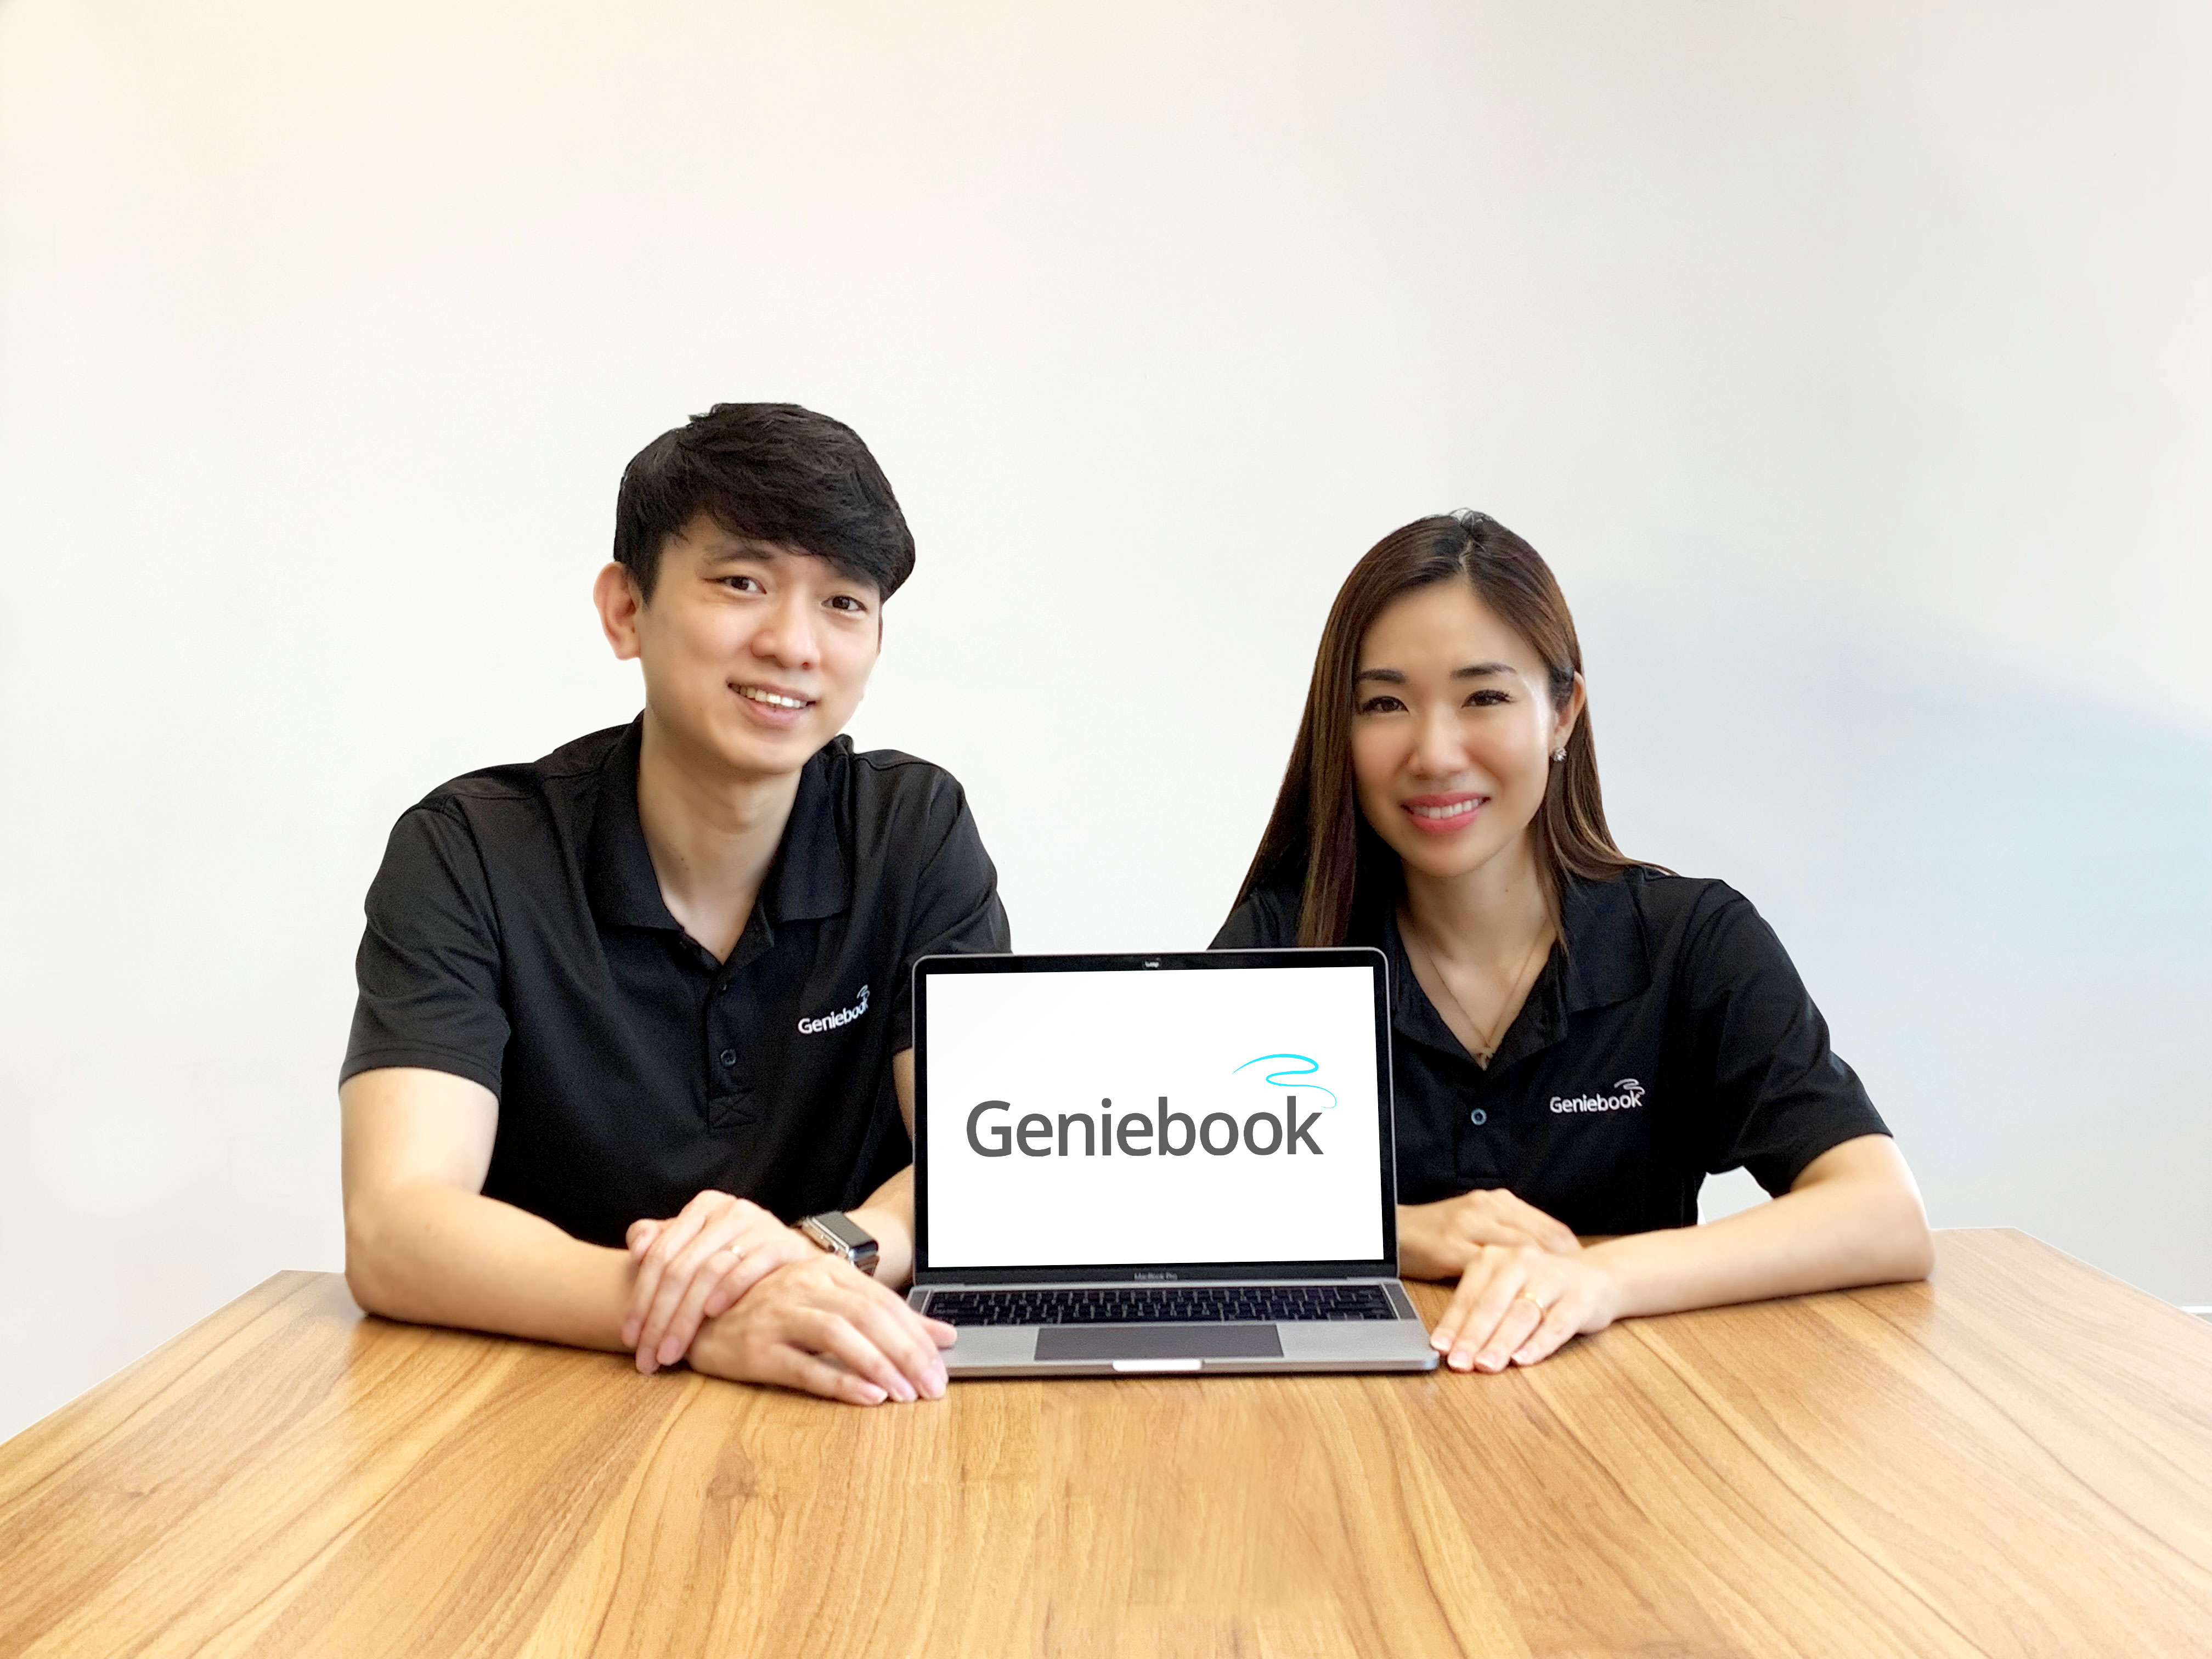 Edtech firm Geniebook secures USD 1.1 million in pre-series A funding